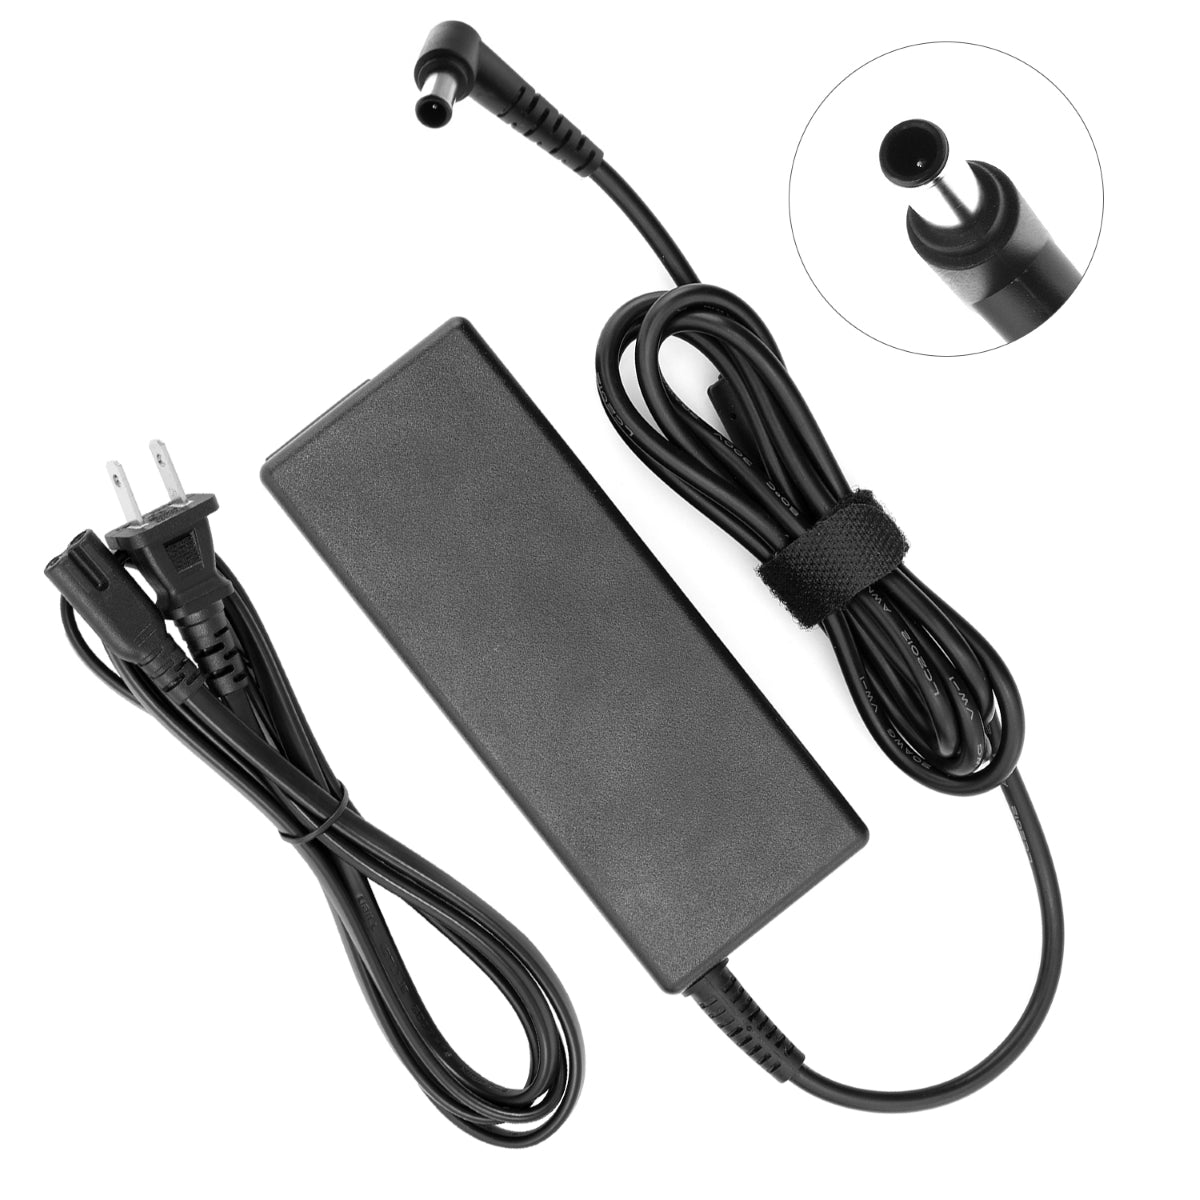 AC Adapter Power Supply for Samsung SyncMaster S27B350H Monitor